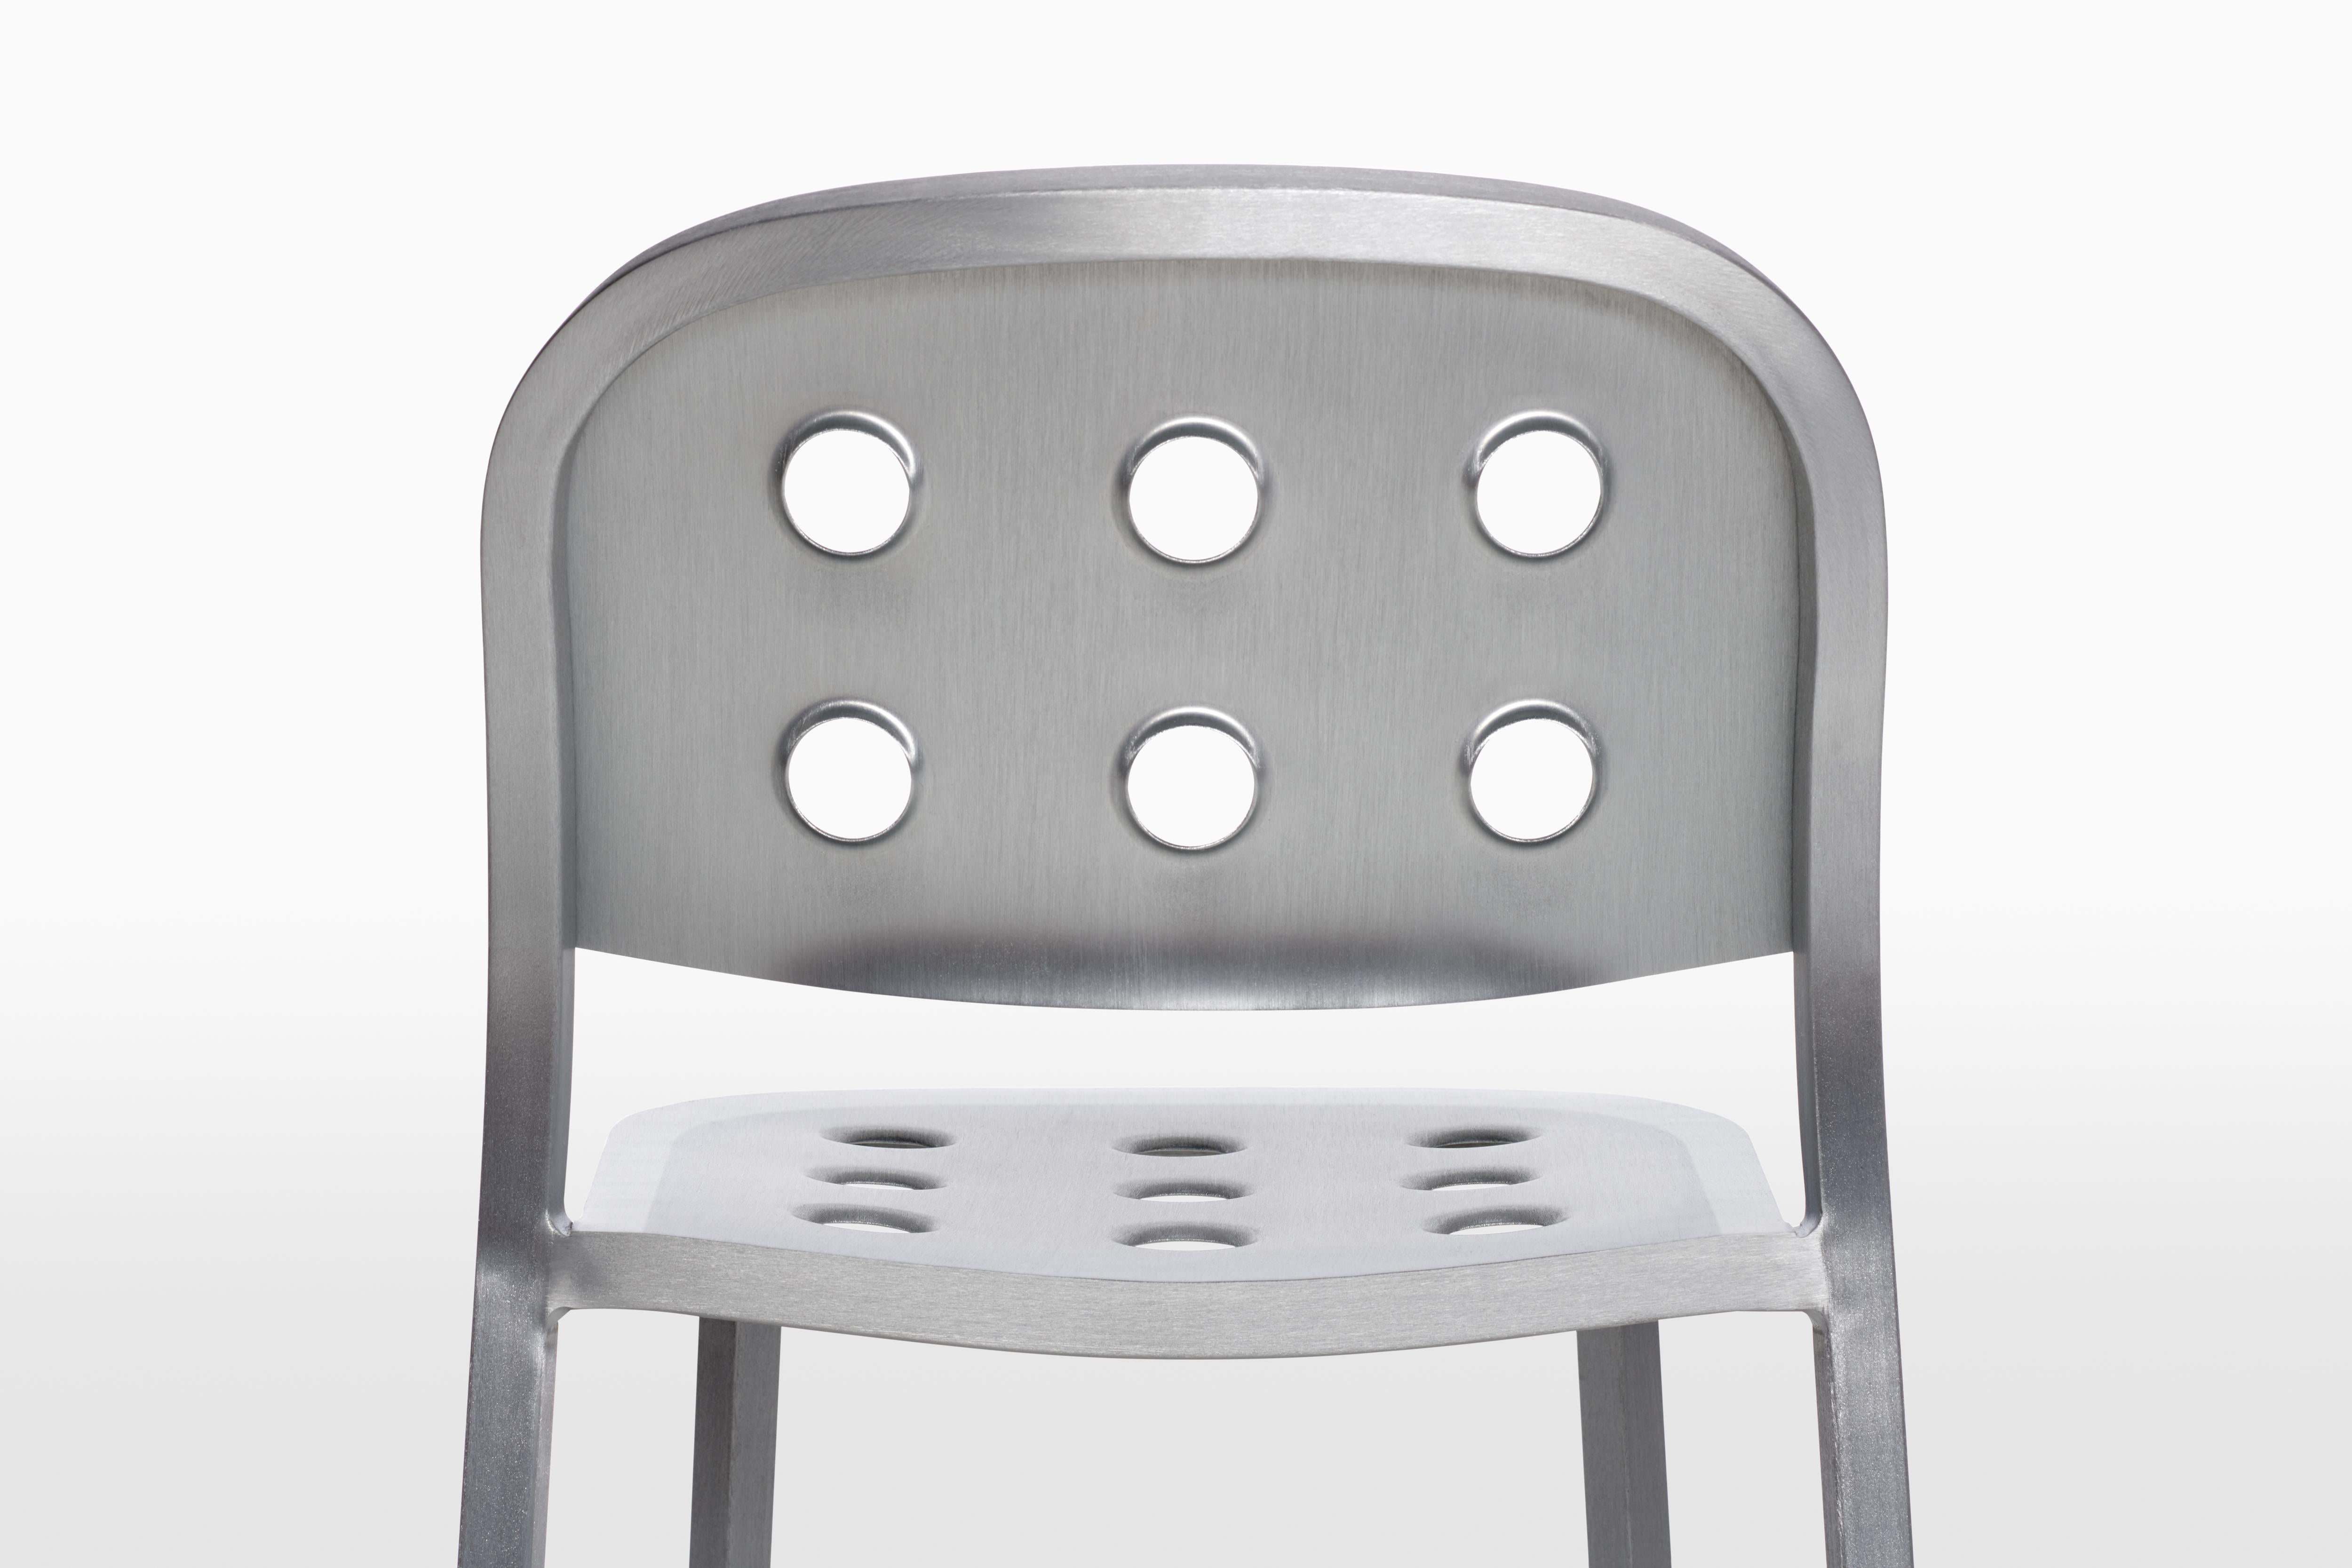 Contemporary Emeco 1 Inch All Aluminum Stacking Chair by Jasper Morrison, 1stdibs Exclusive For Sale